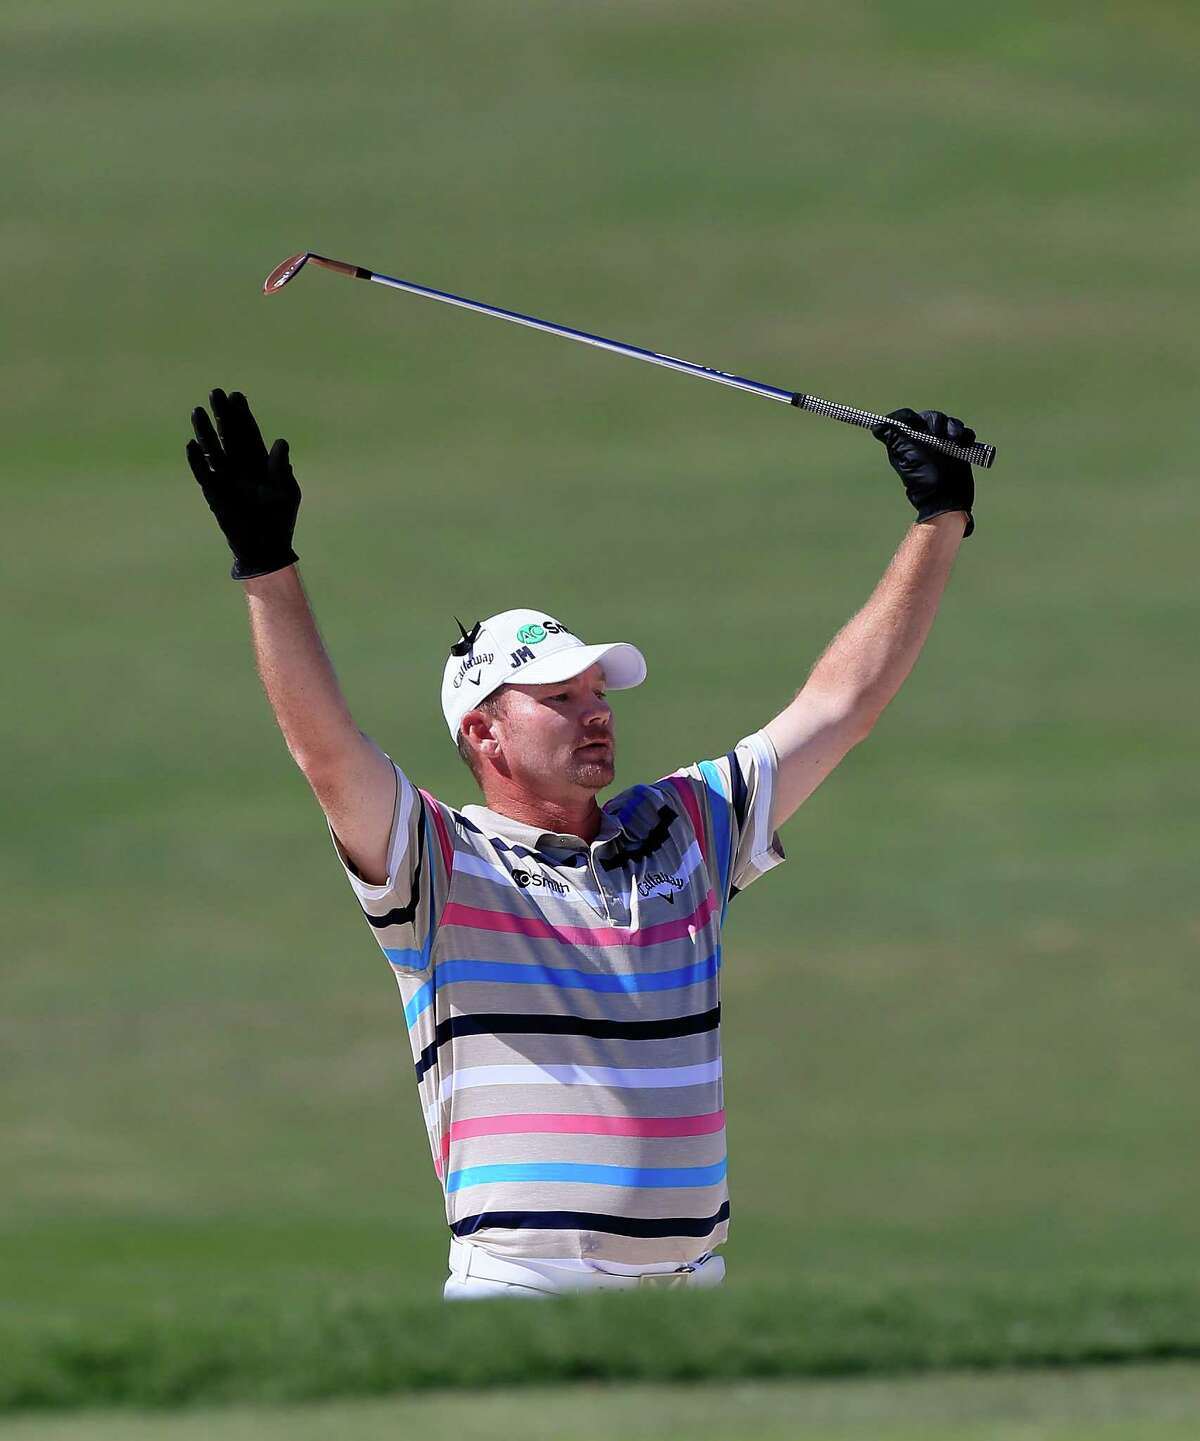 Tommy Gainey became known for more than his unusual habit of wearing two gloves when he shot a 60 on Sunday, highlighted by an eagle from a bunker on the 15th hole, to finish off his first PGA Tour win.